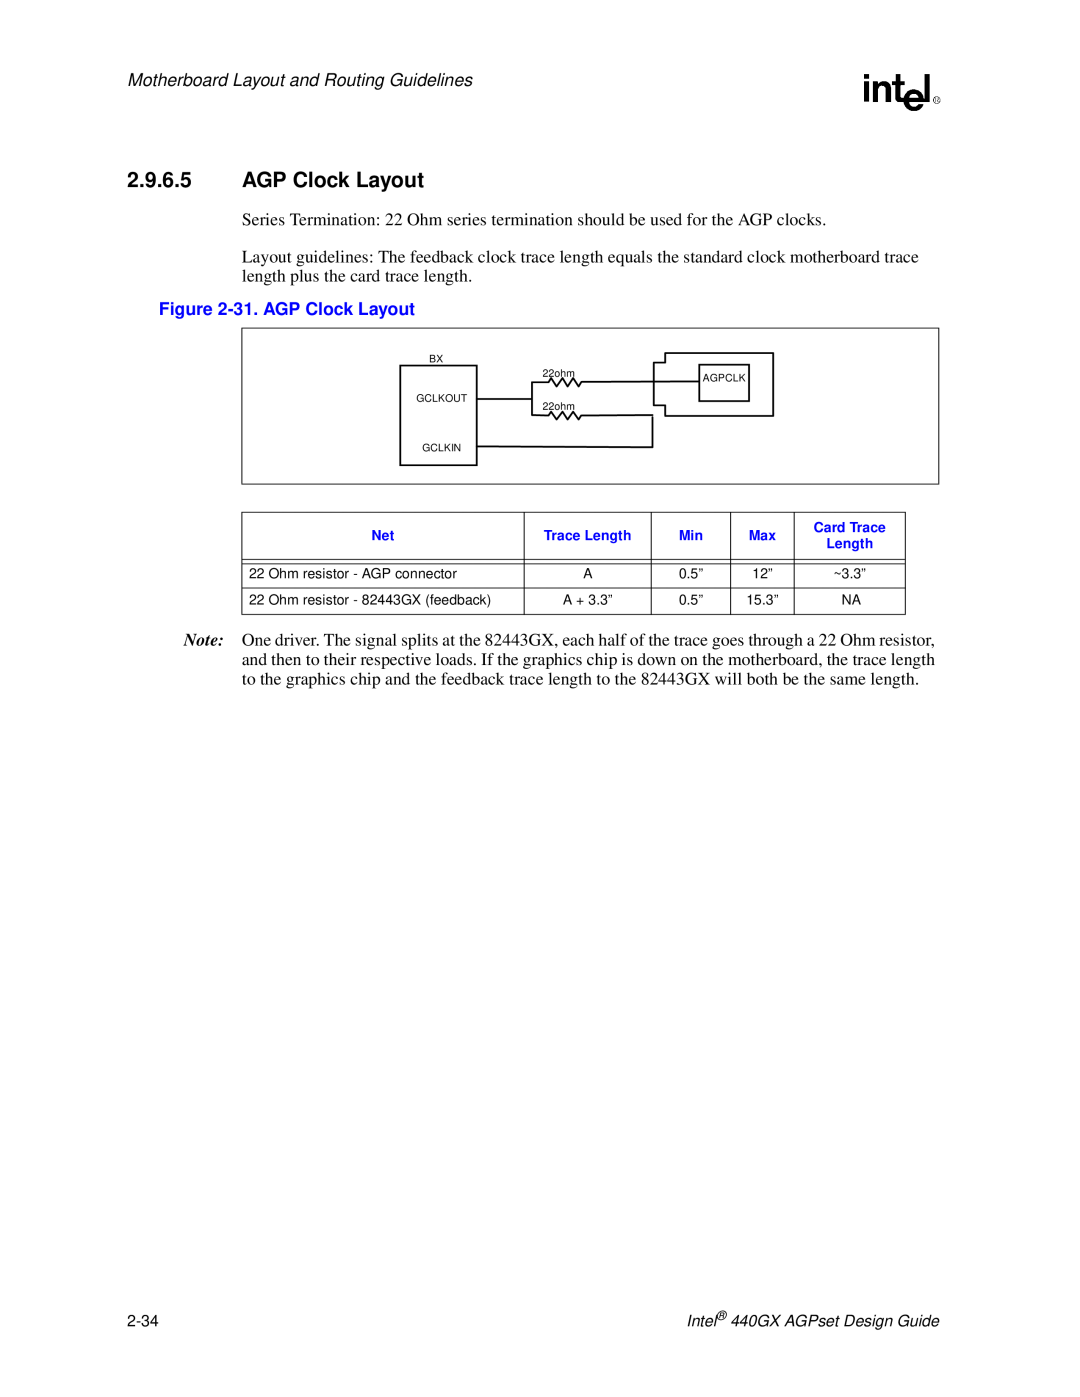 Intel 440GX manual 31. AGP Clock Layout, Motherboard Layout and Routing Guidelines 